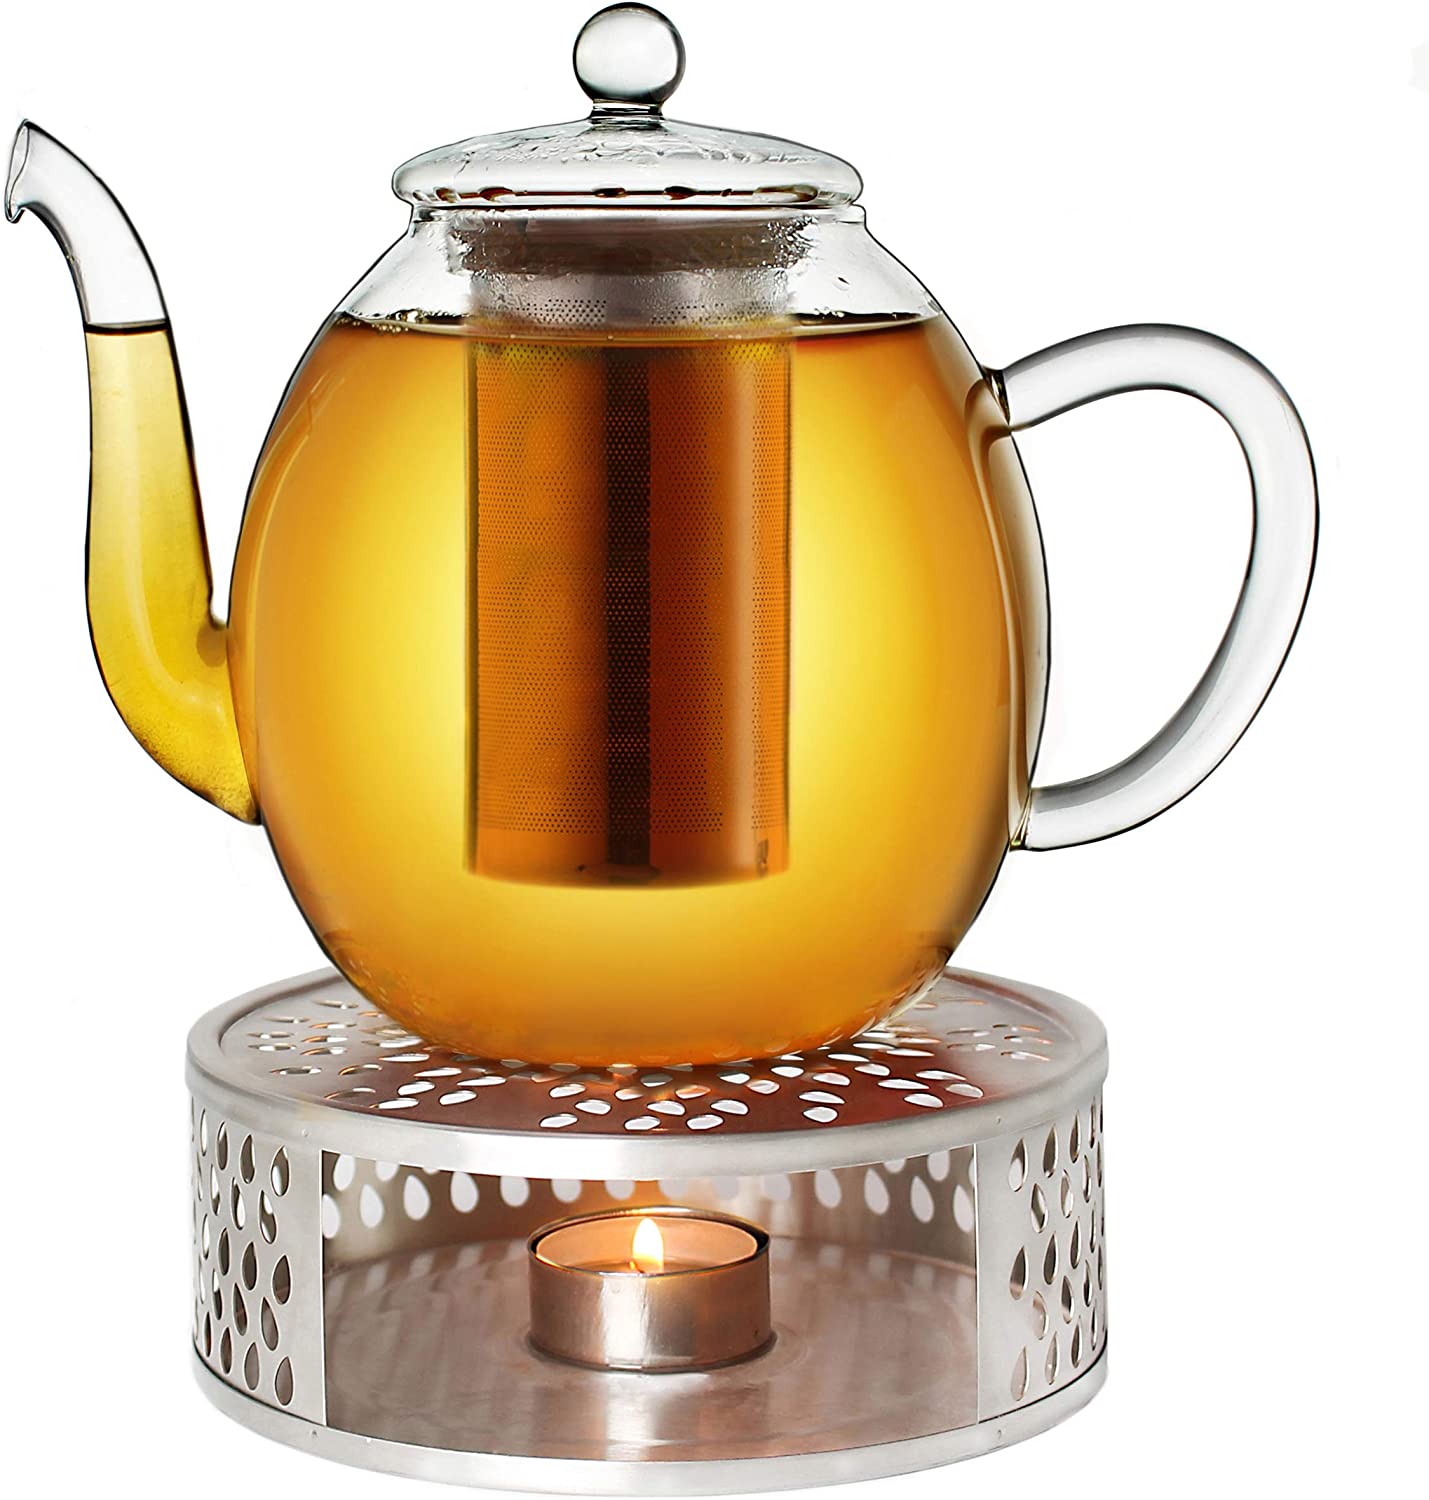 Creano Glass Teapot 1.0 L + a stainless steel warmer, 3-piece glass teapot with integrated stainless steel strainer and glass lid, ideal for preparing loose teas, drip-free